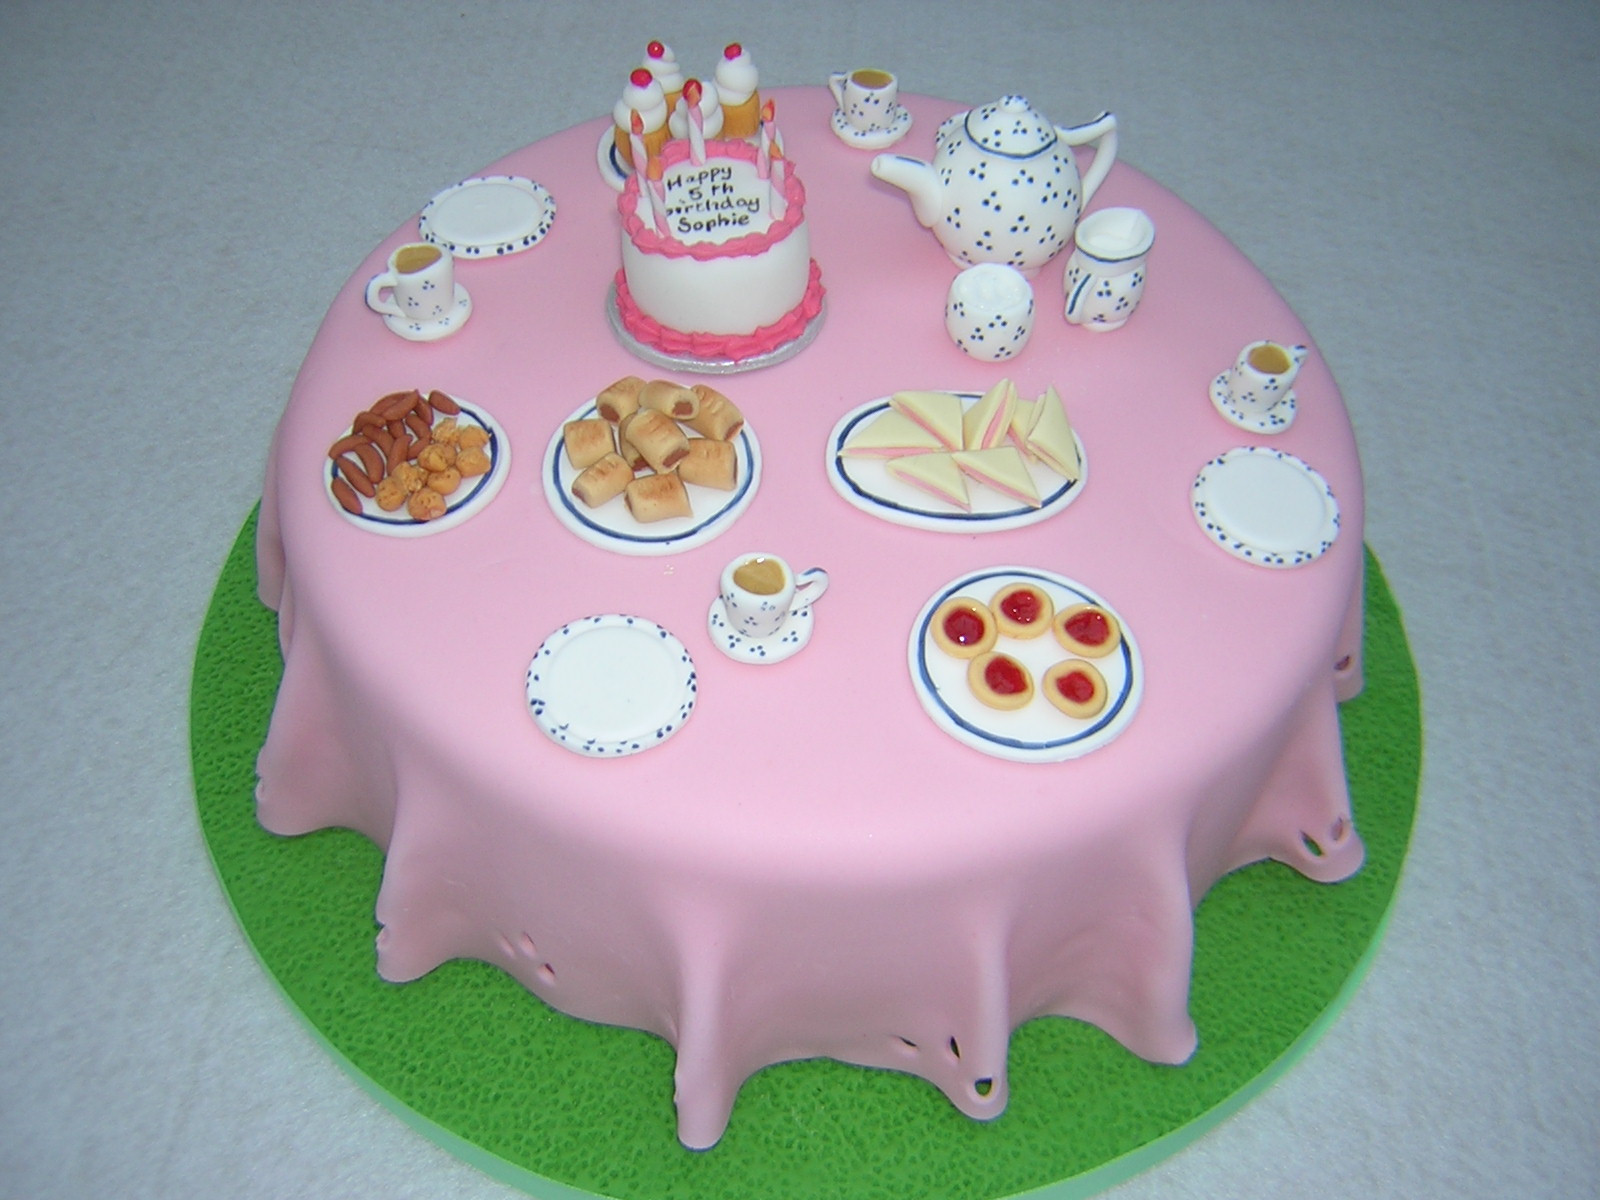 Tea Party Birthday Cake Ideas
 Learn How to Host a Tea Party Birthday for Your Kids and